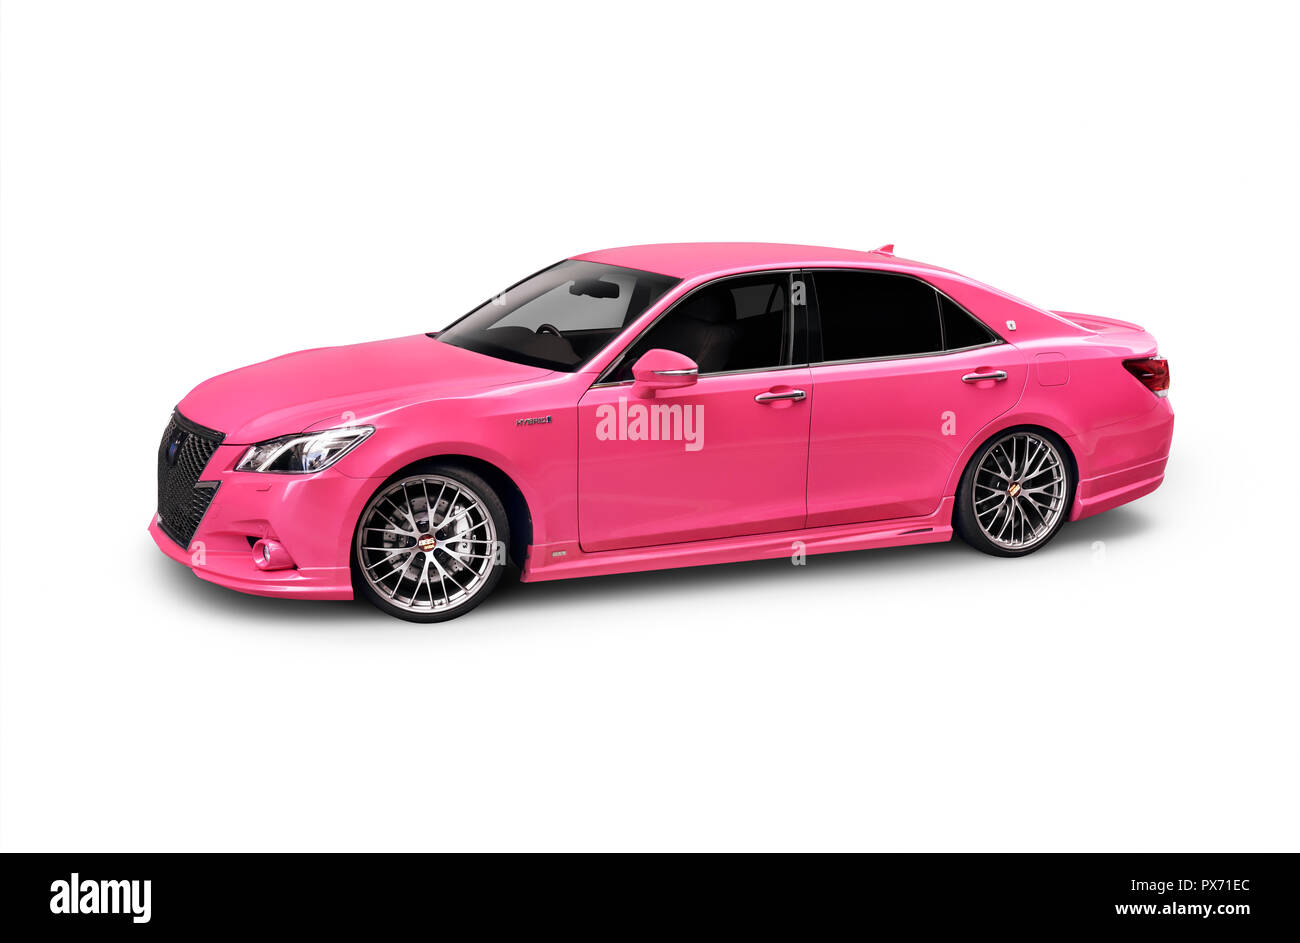 Bright pink 2017 Toyota Crown Athlete hybrid sedan Japanese luxury car isolated on white background with clipping path Stock Photo